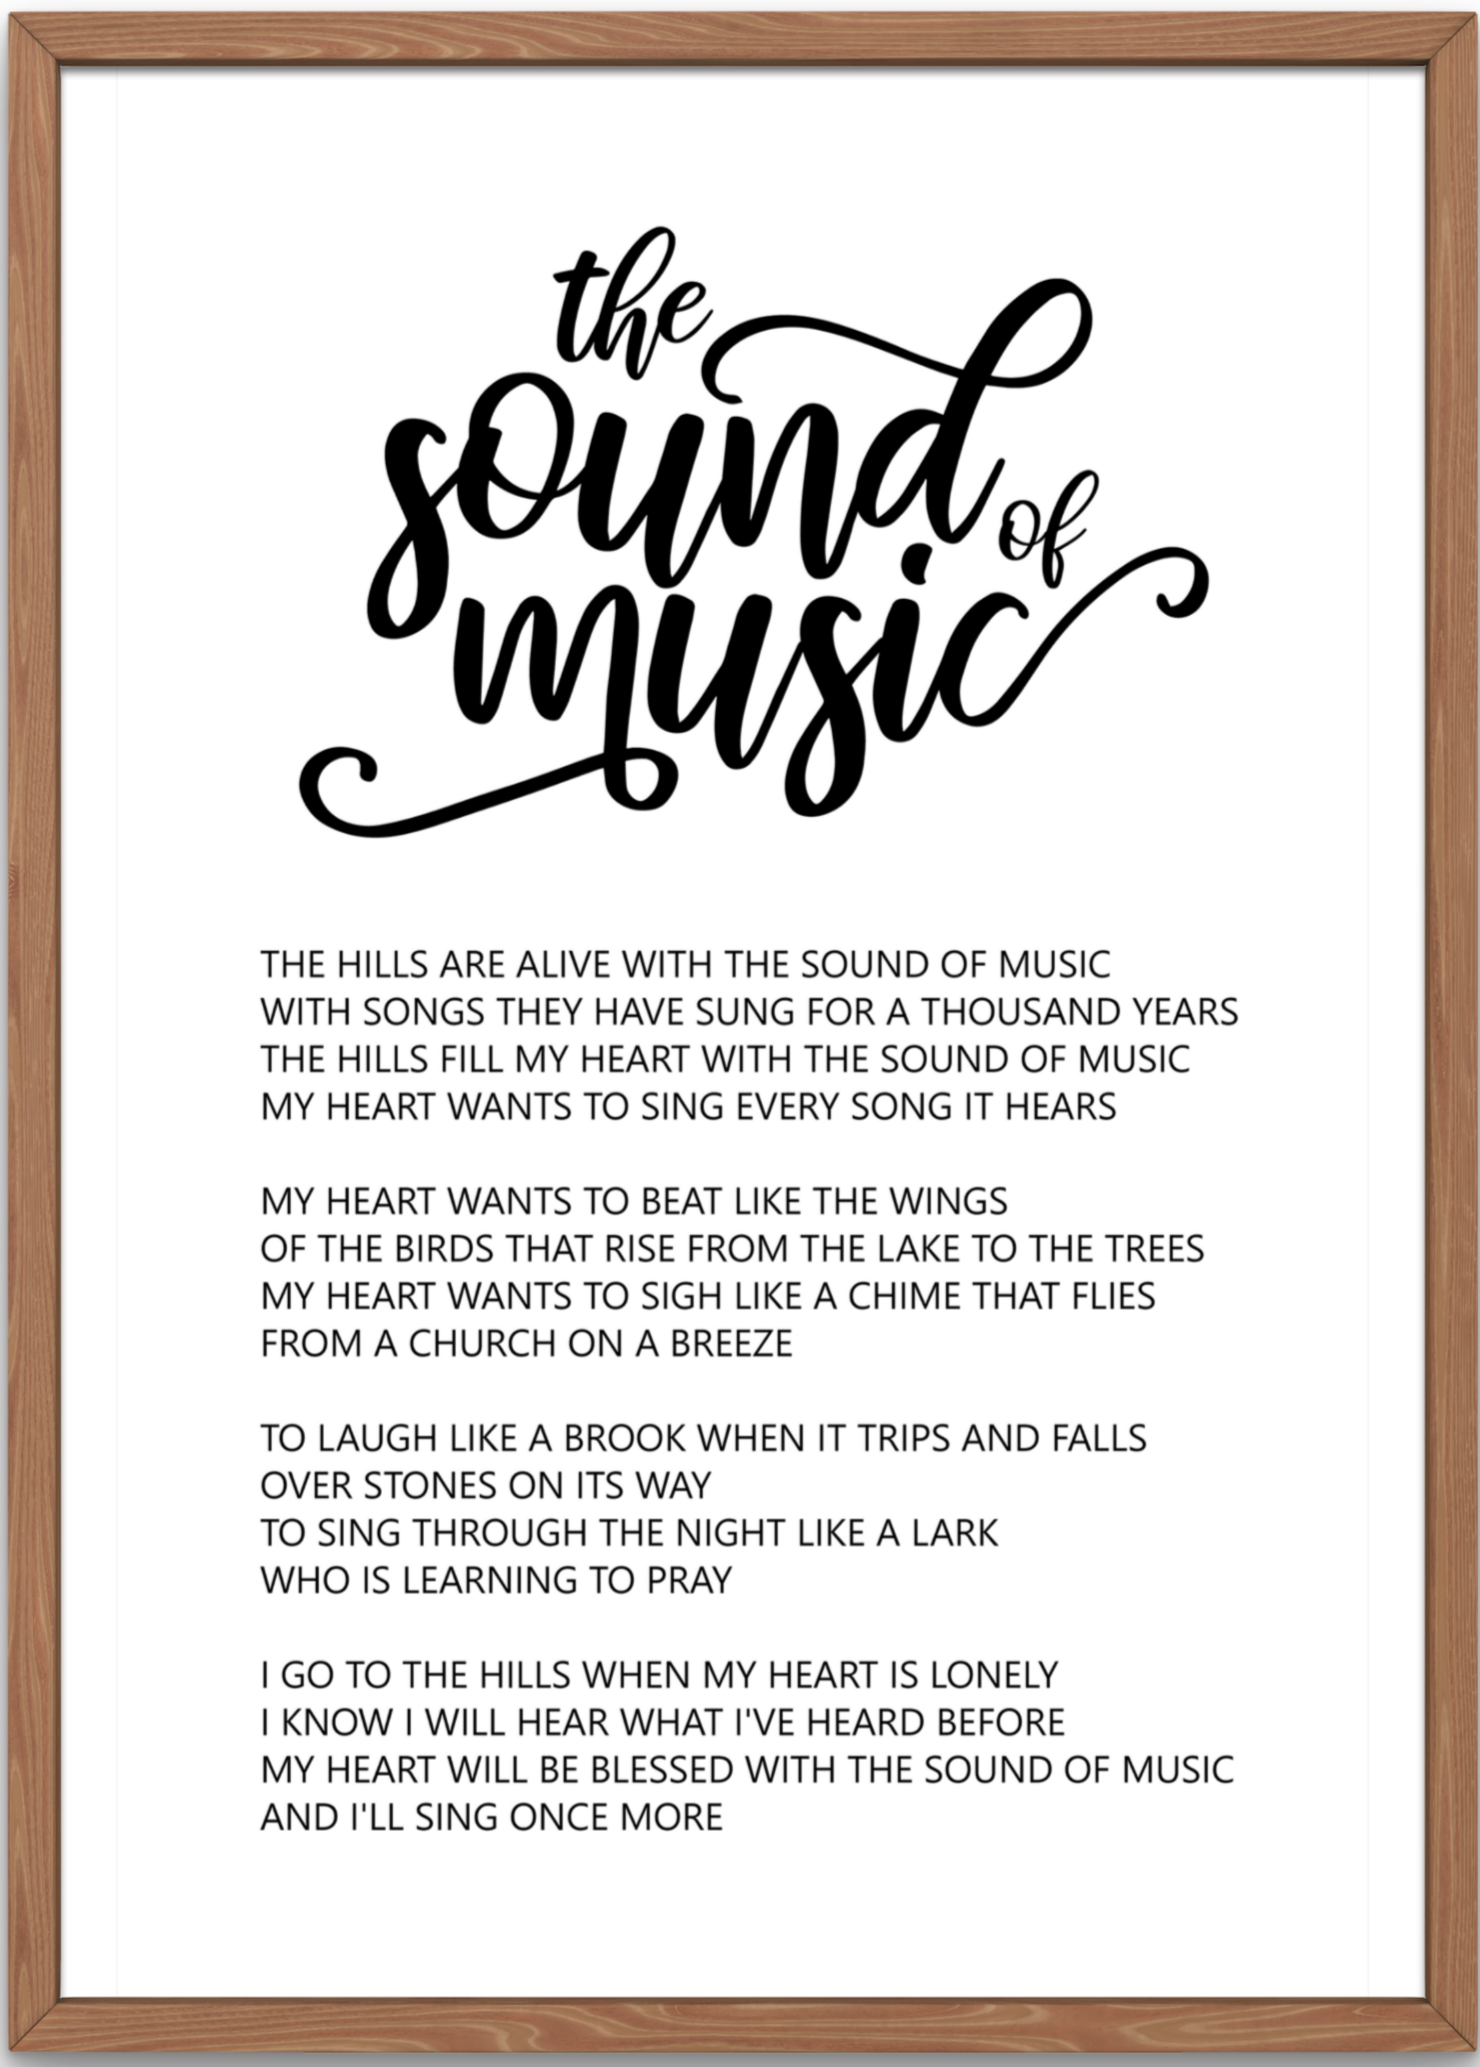 Songs and lyrics - sing with us like in The Sound of Music ♬♬